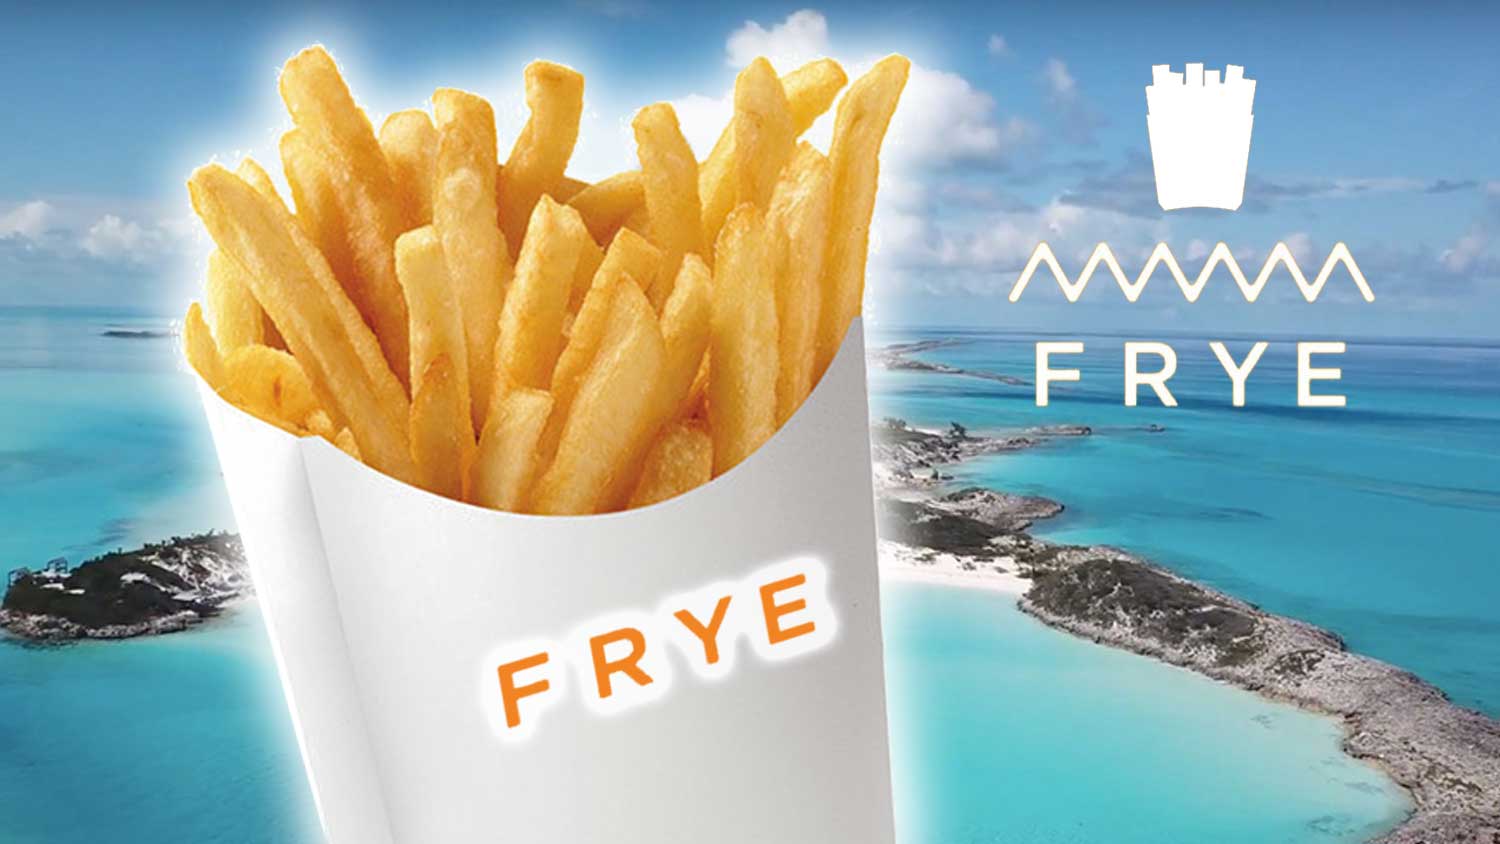 There’s Now a ‘Frye’ Festival and It’s Perfect for Hungry Vegans